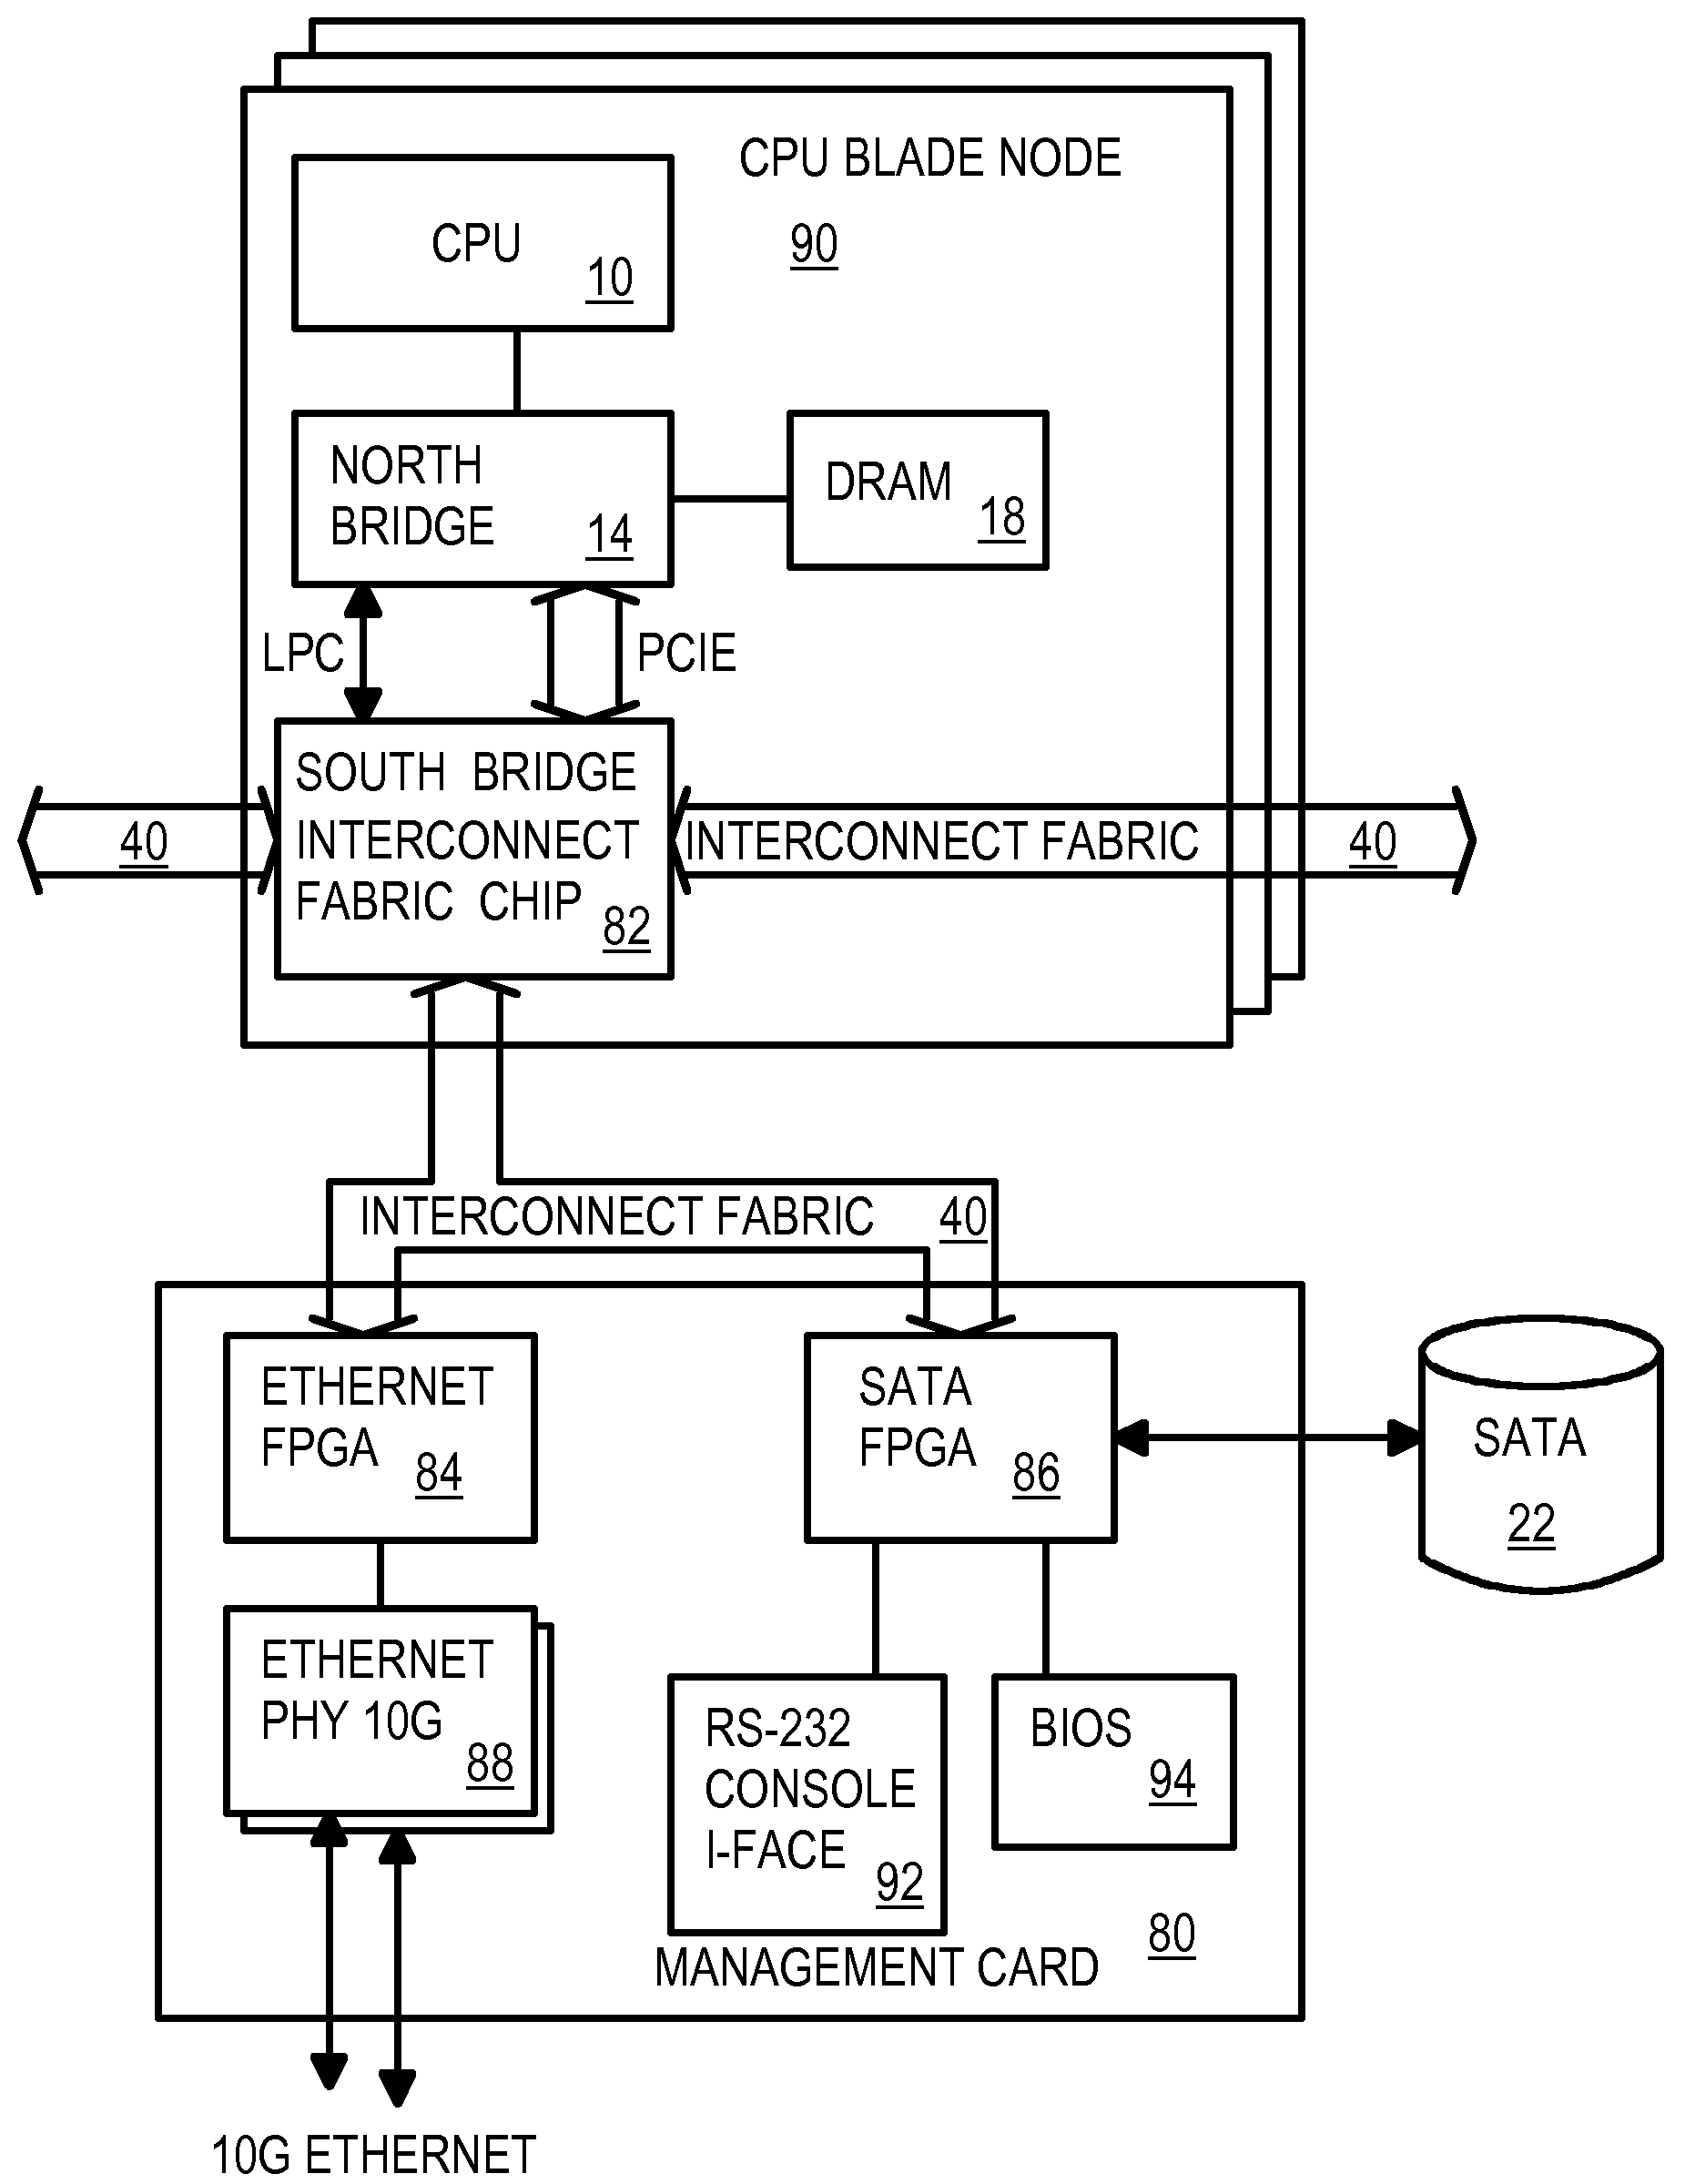 Hardware-Based Virtualization of BIOS, Disks, Network-Interfaces, & Consoles Using a Direct Interconnect Fabric